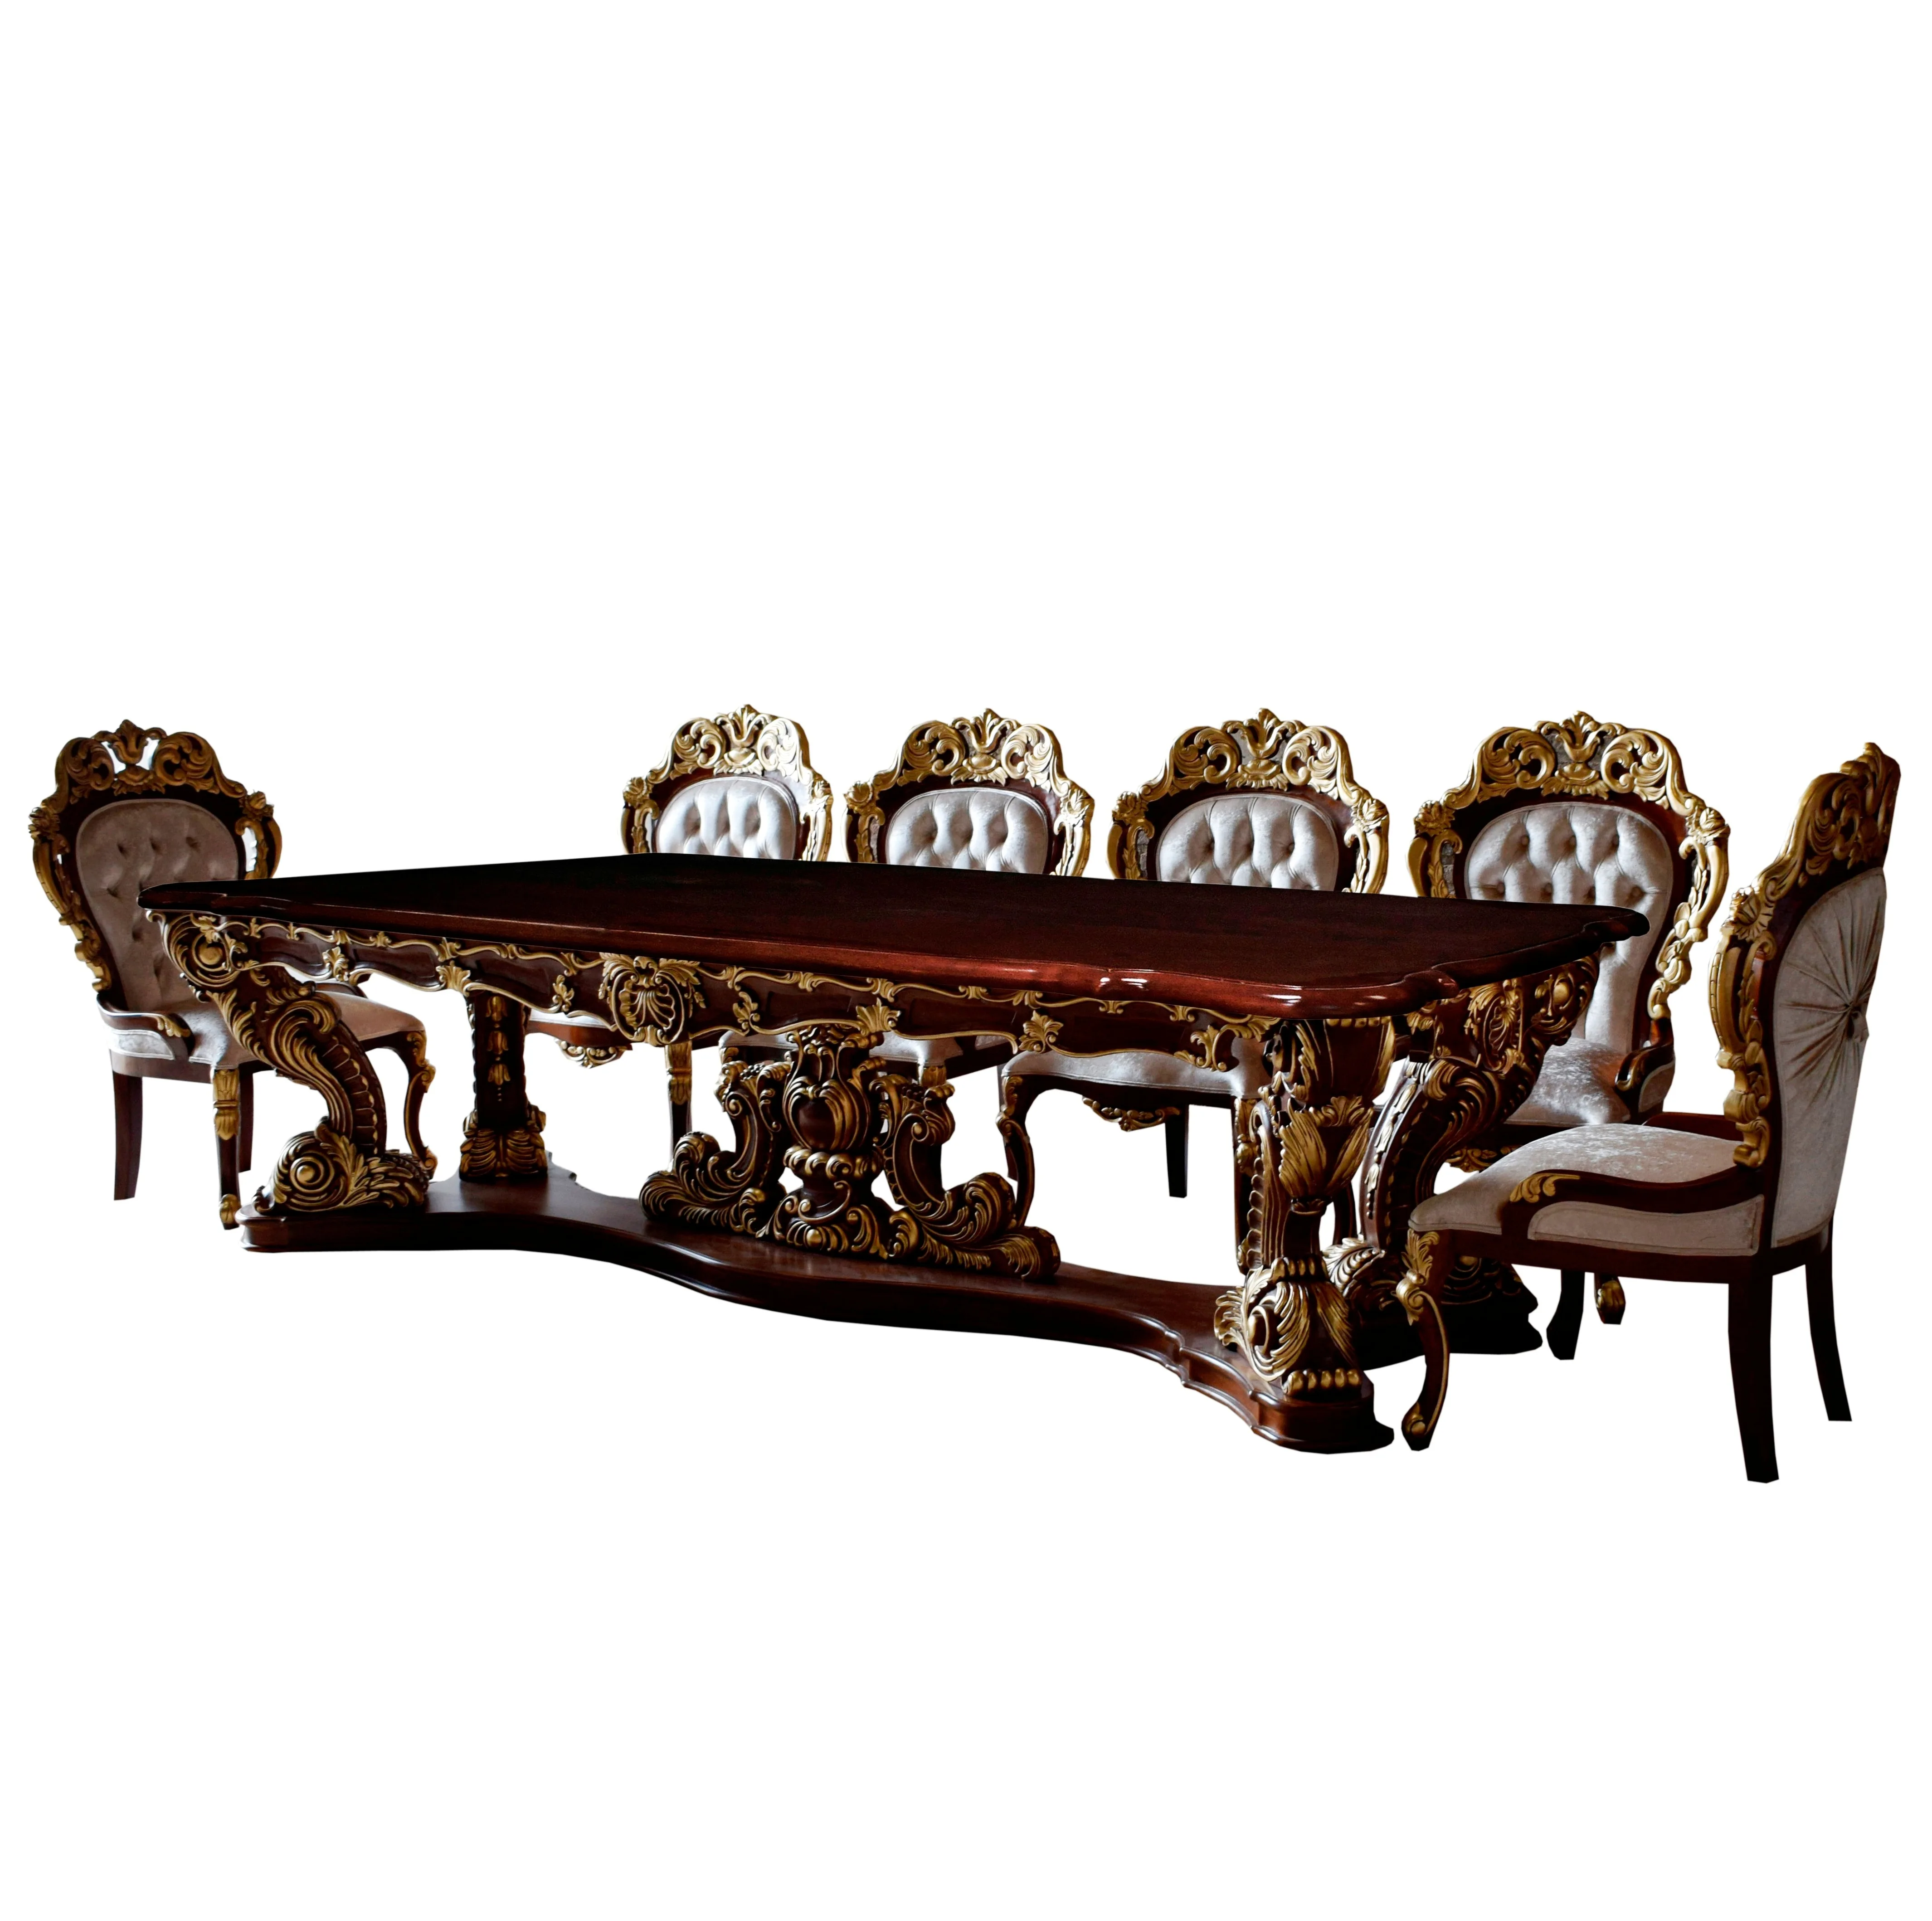 
Luxury Heavy Carved Royal Dining Table Set 10 Chairs  (50045369258)